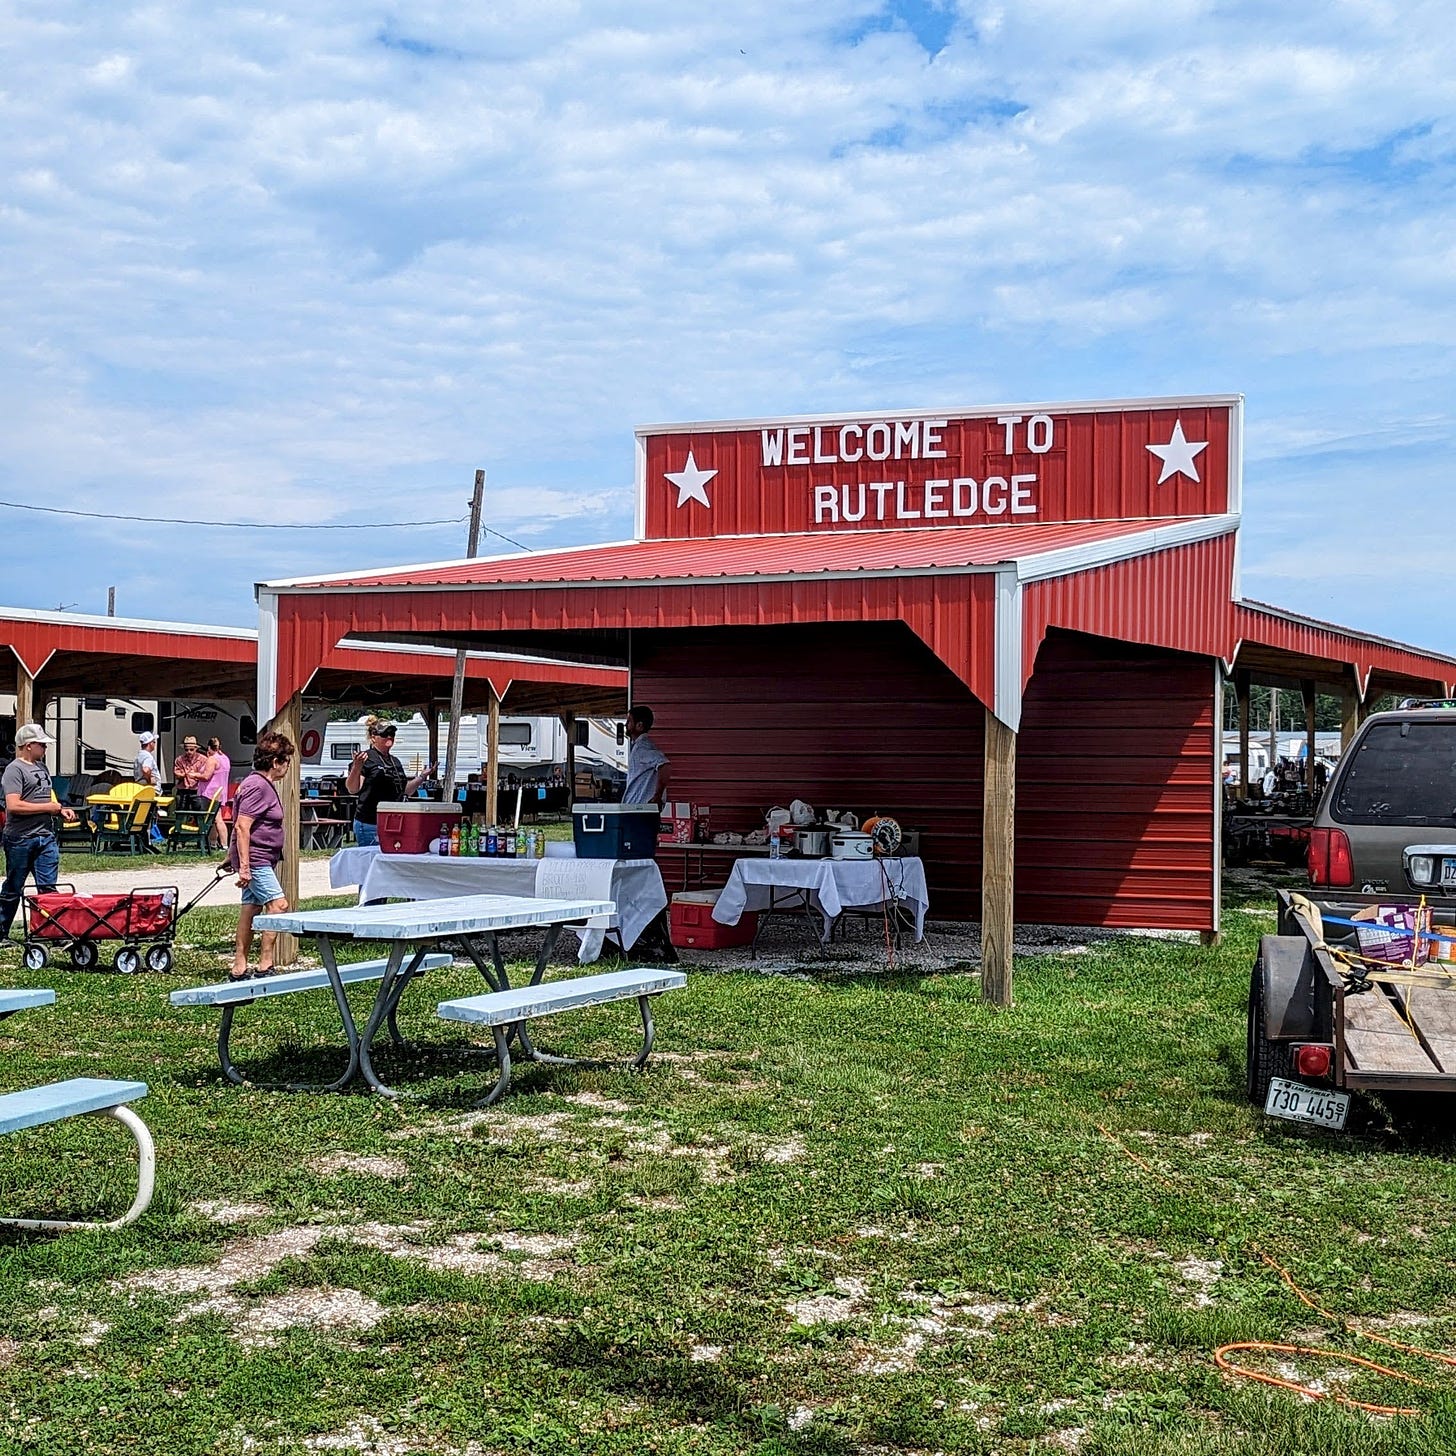 A red shed with a 'Welcome to Rutledge' sign, and a few food items for sale next to some picnic tables